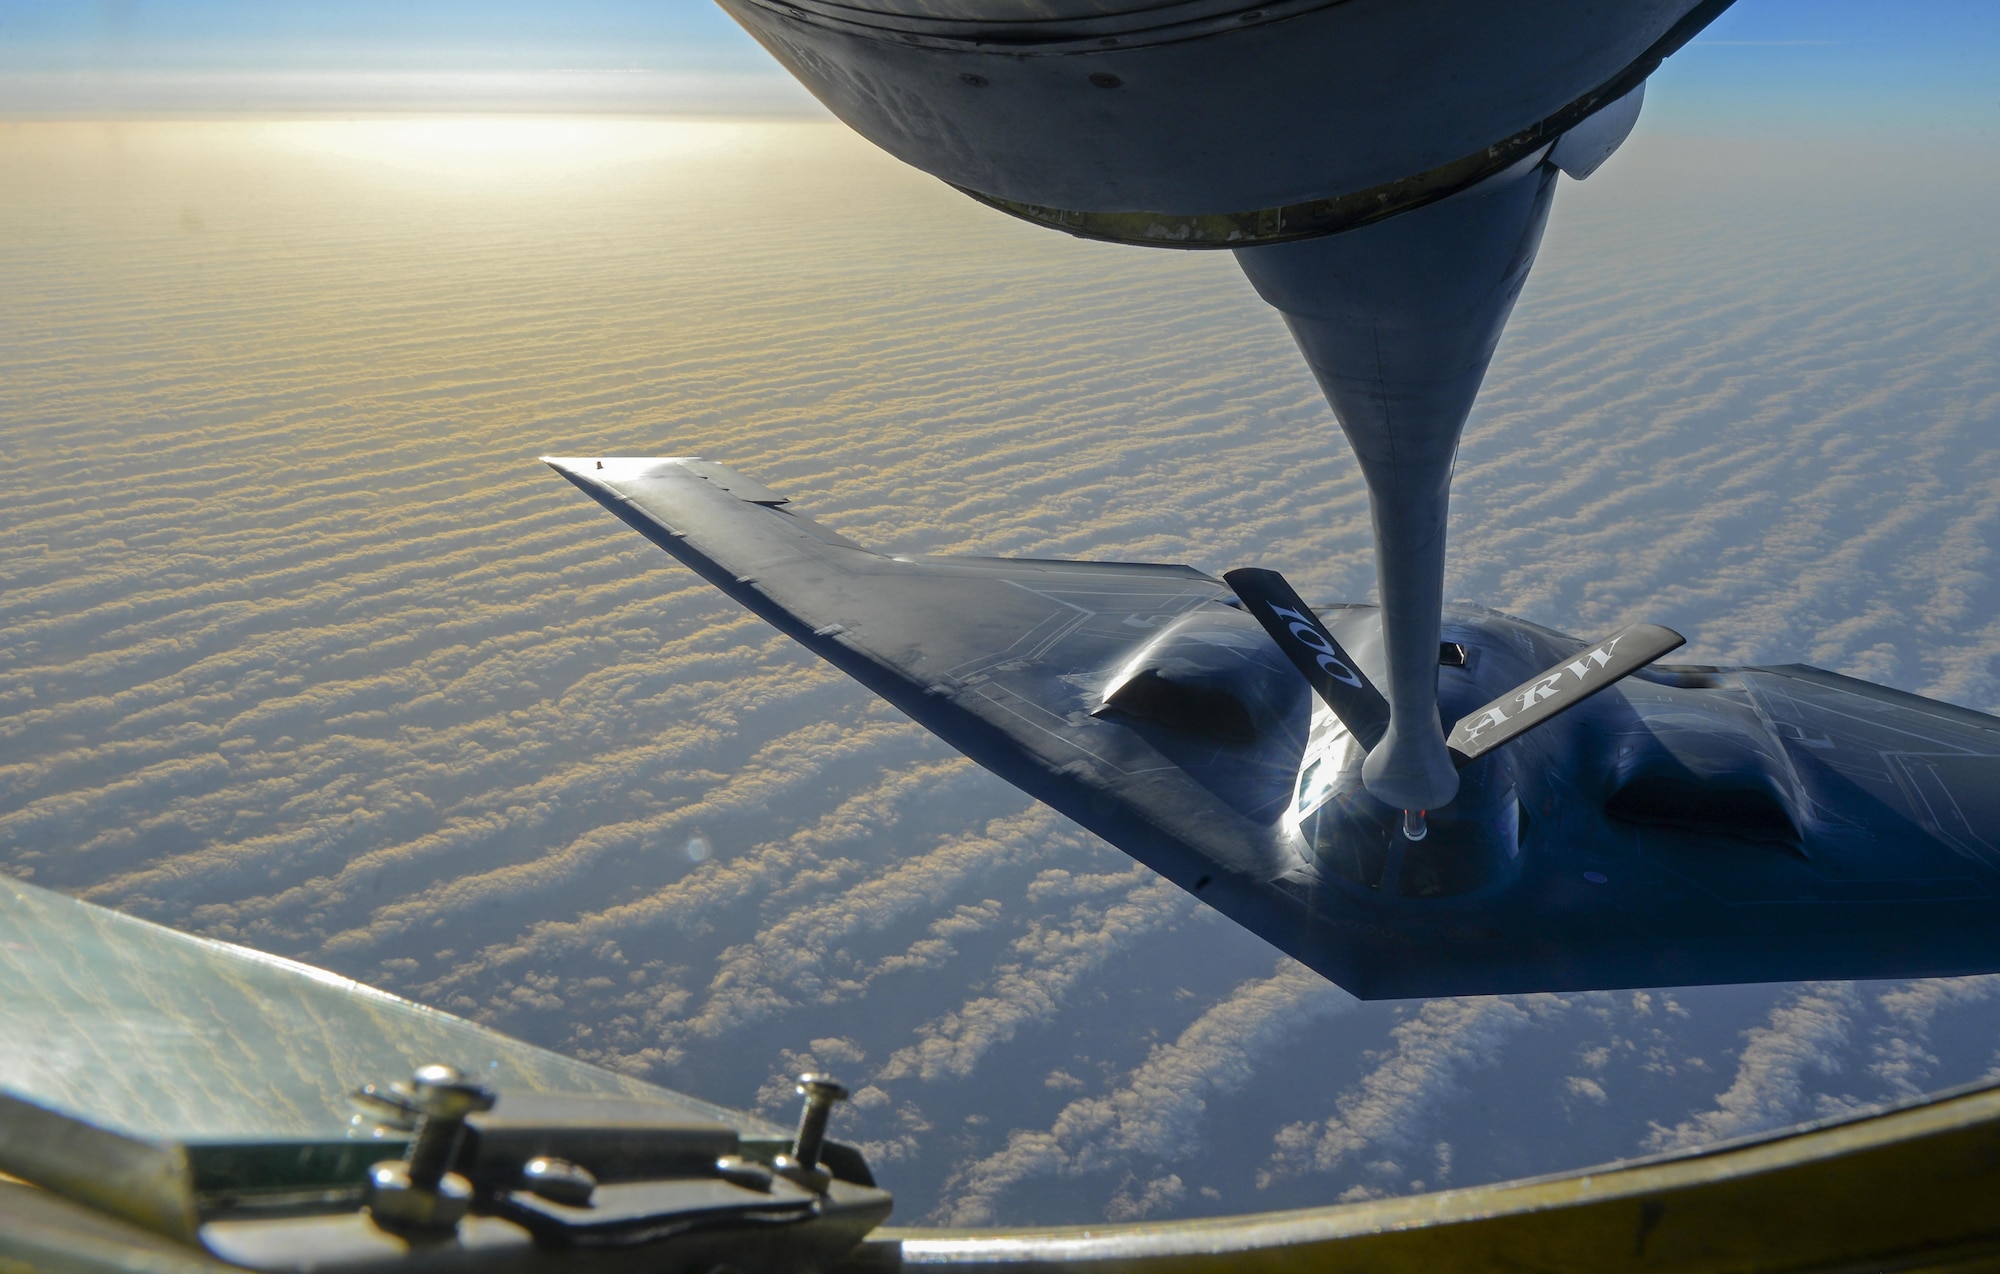 A U.S. Air Force B-2 Spirit from Whiteman Air Force Base, Mo., flies into position to receive fuel from a KC-135 Stratotanker assigned to the 100th Air Refueling Wing, RAF Mildenhall, England, off the coast of Spain, June 13, 2017. The B-2 brings massive firepower to bear, in a short time, anywhere around the globe. The aircraft’s capability to penetrate air defenses and threaten effective retaliation provides a strong, effective deterrent and combat force well into the 21st century. (U.S. Air Force photo by Staff Sgt. Micaiah Anthony)